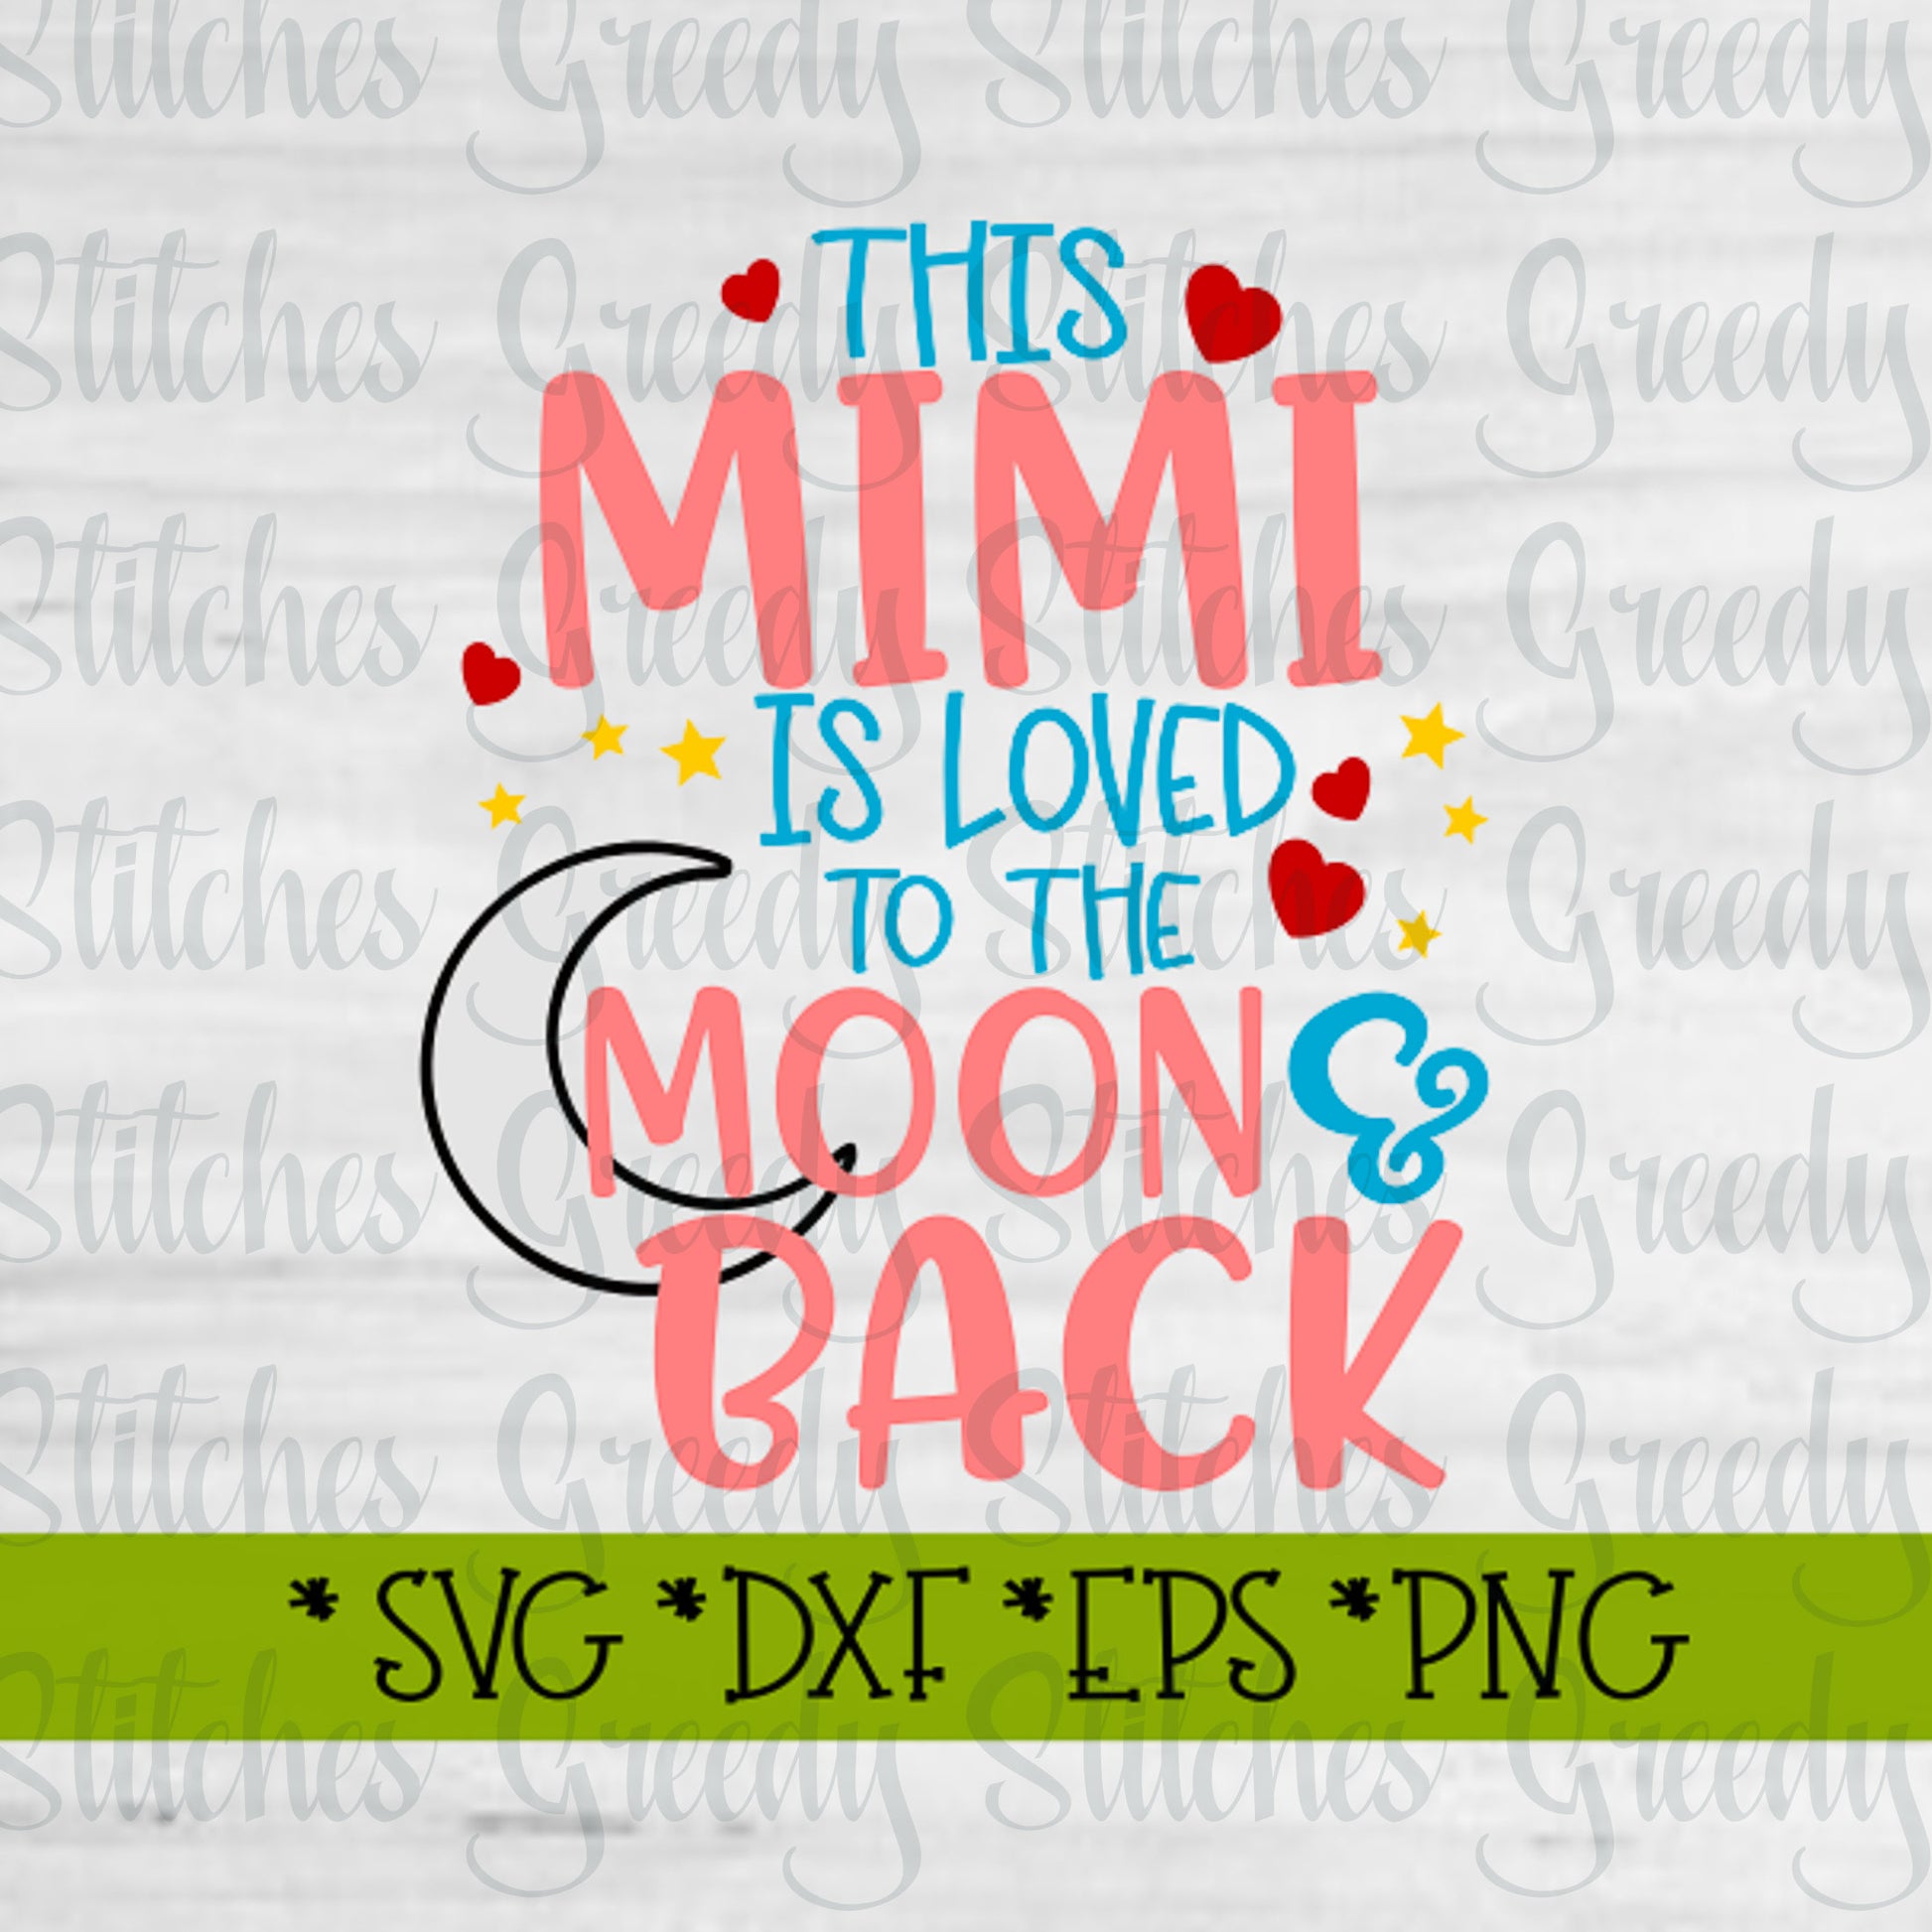 Mother&#39;s Day | This Mimi Is Loved To The Moon & Back svg, dxf, eps, png, wmf. Mimi SVG | Mimi Is Loved SVG | Instant Download Cut File.